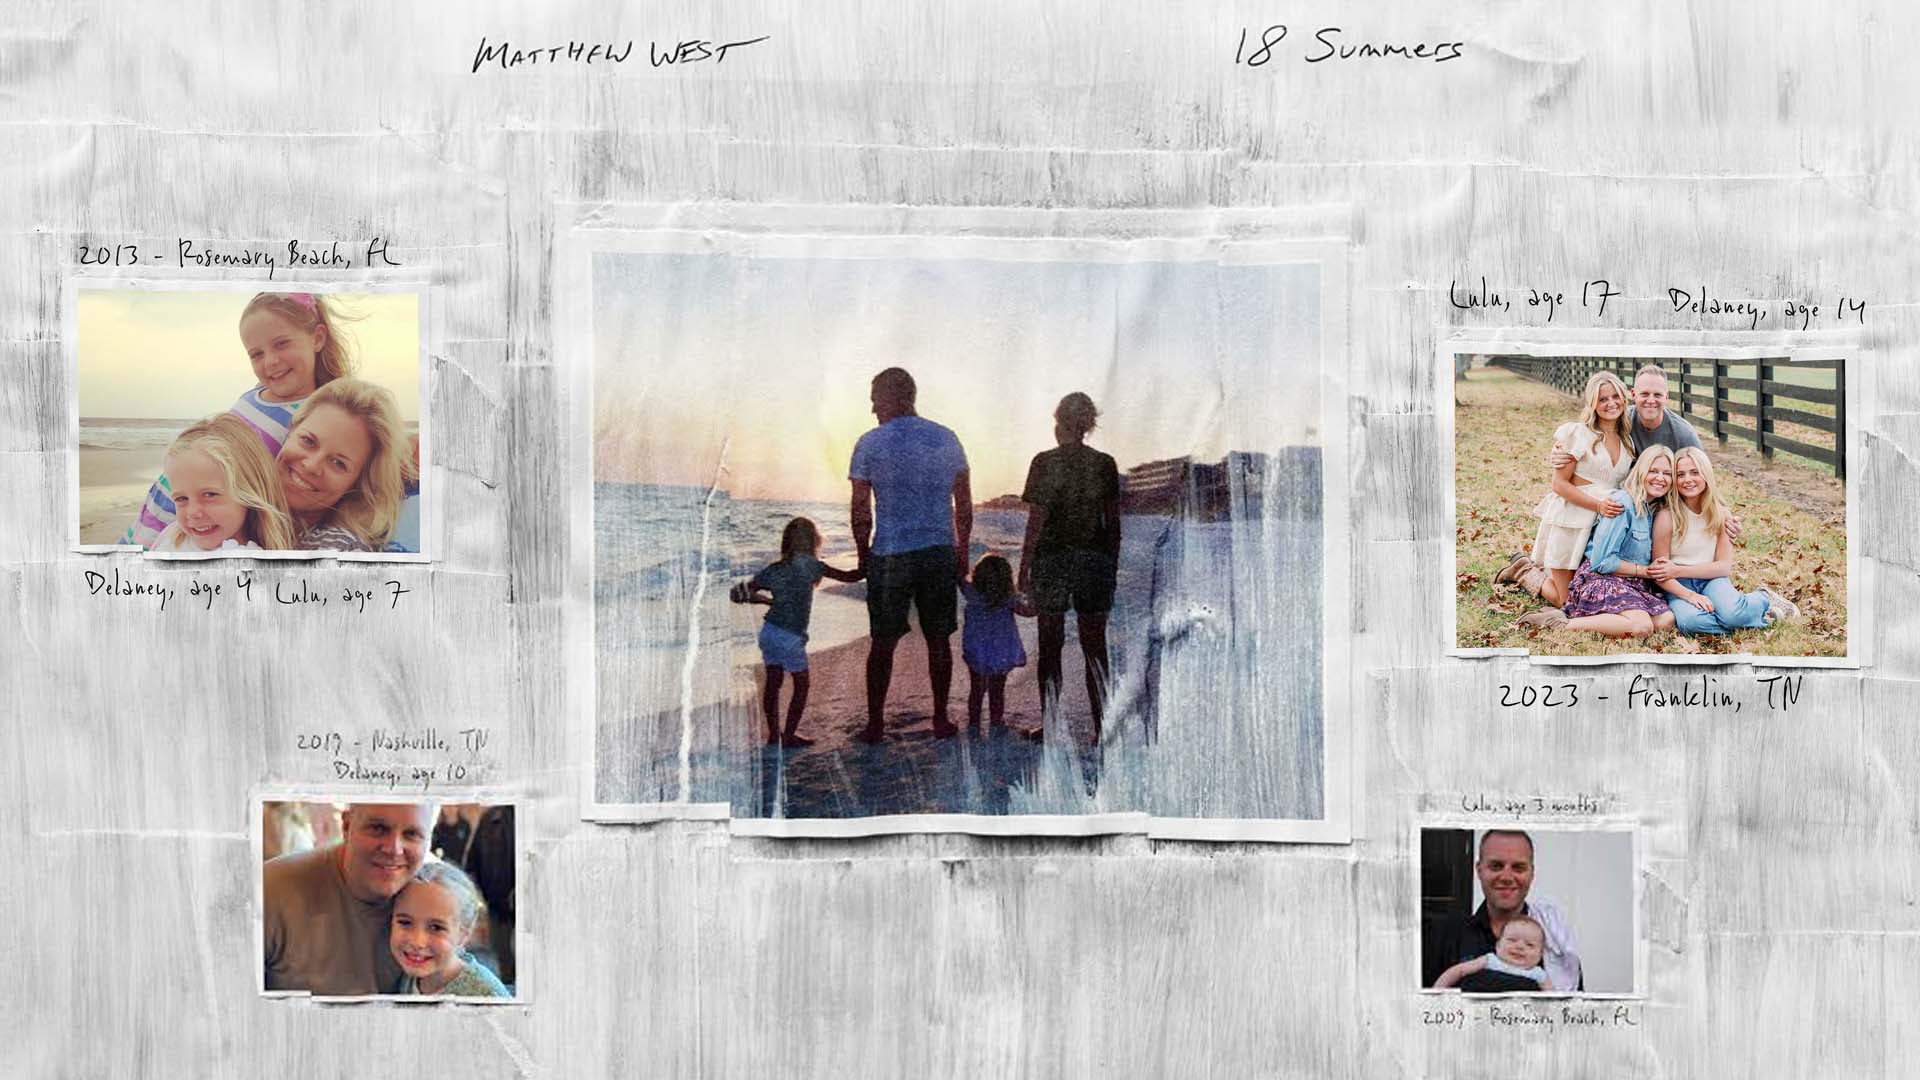 Matthew West's Family Pictures and Song "18 Summers"